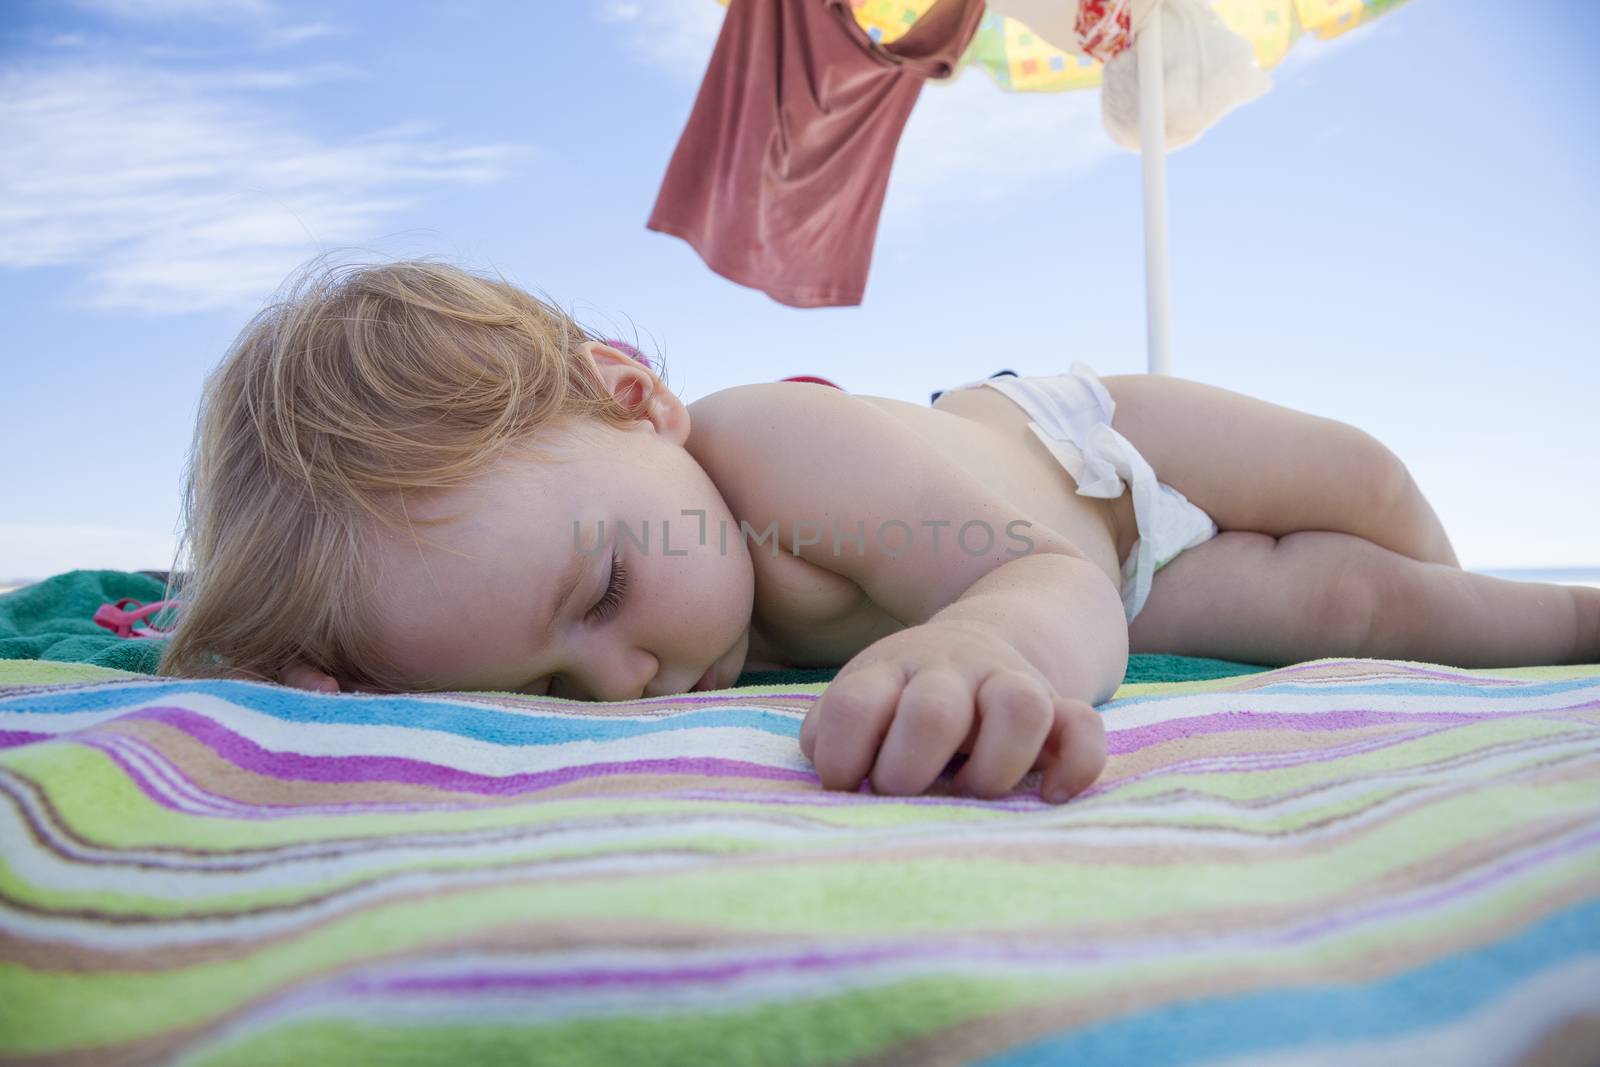 one year baby with white diaper sleeping on striped colored beach towel under parasol